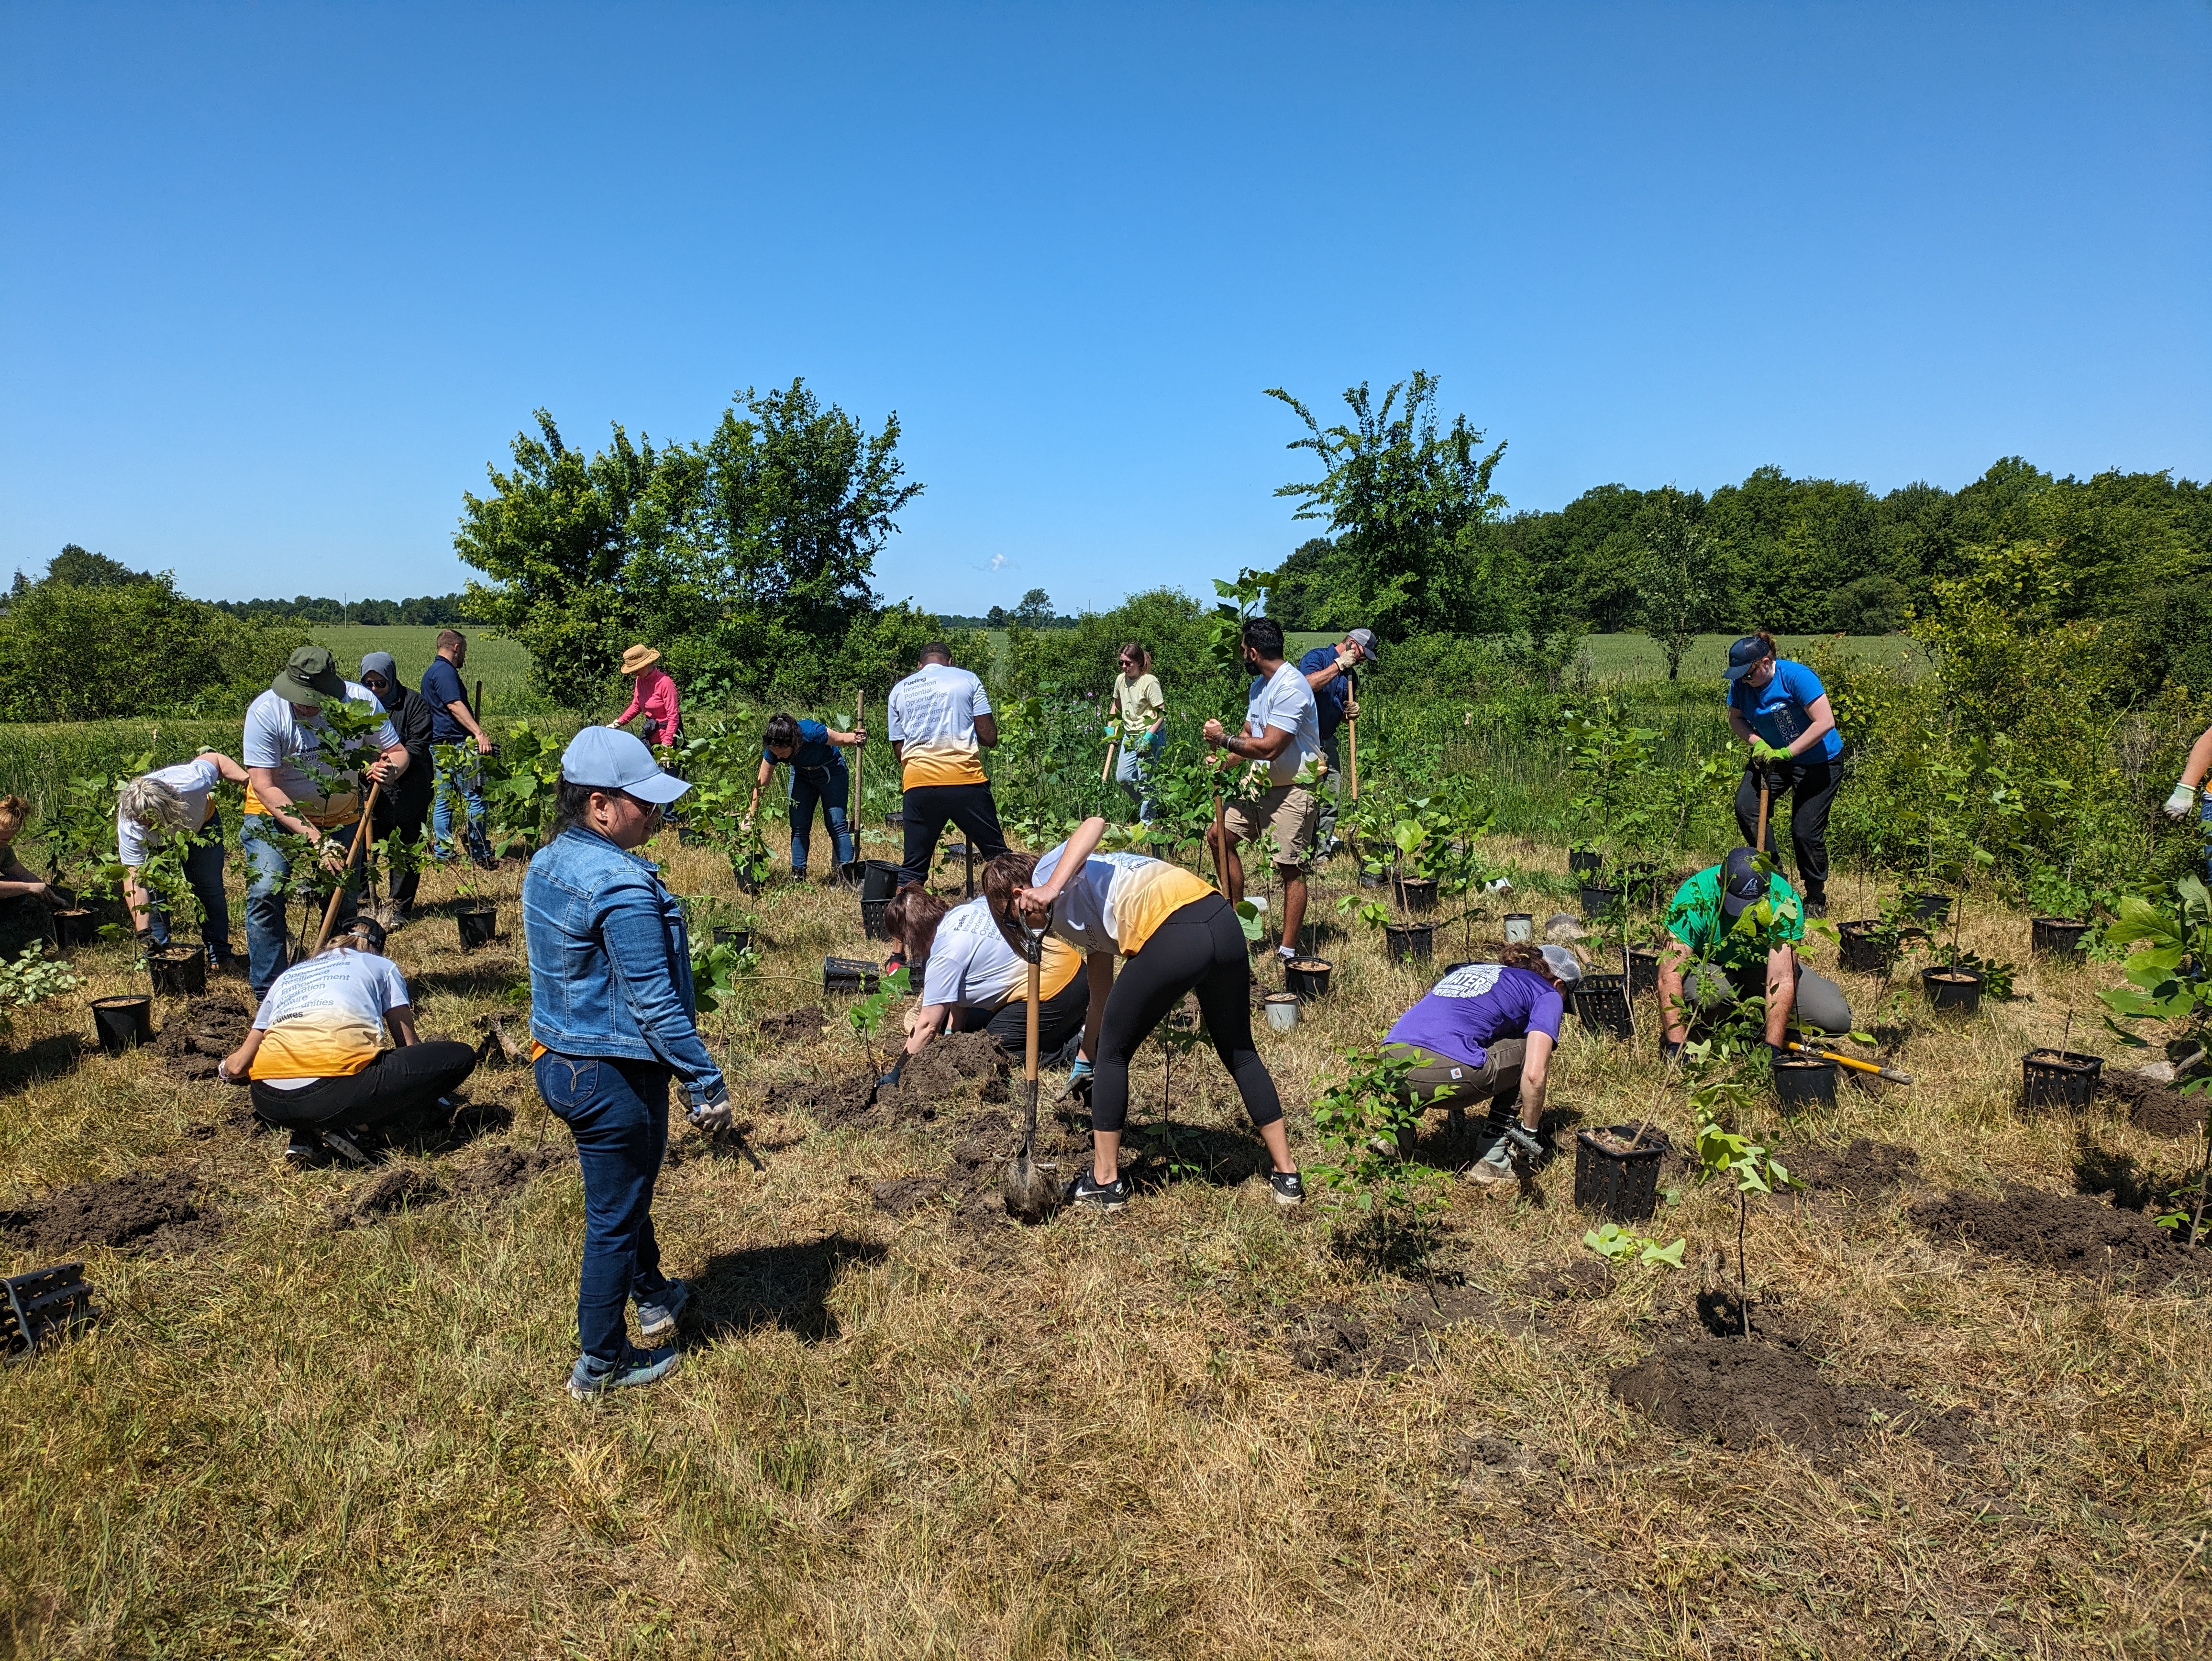 Image of various people planting trees in a field.